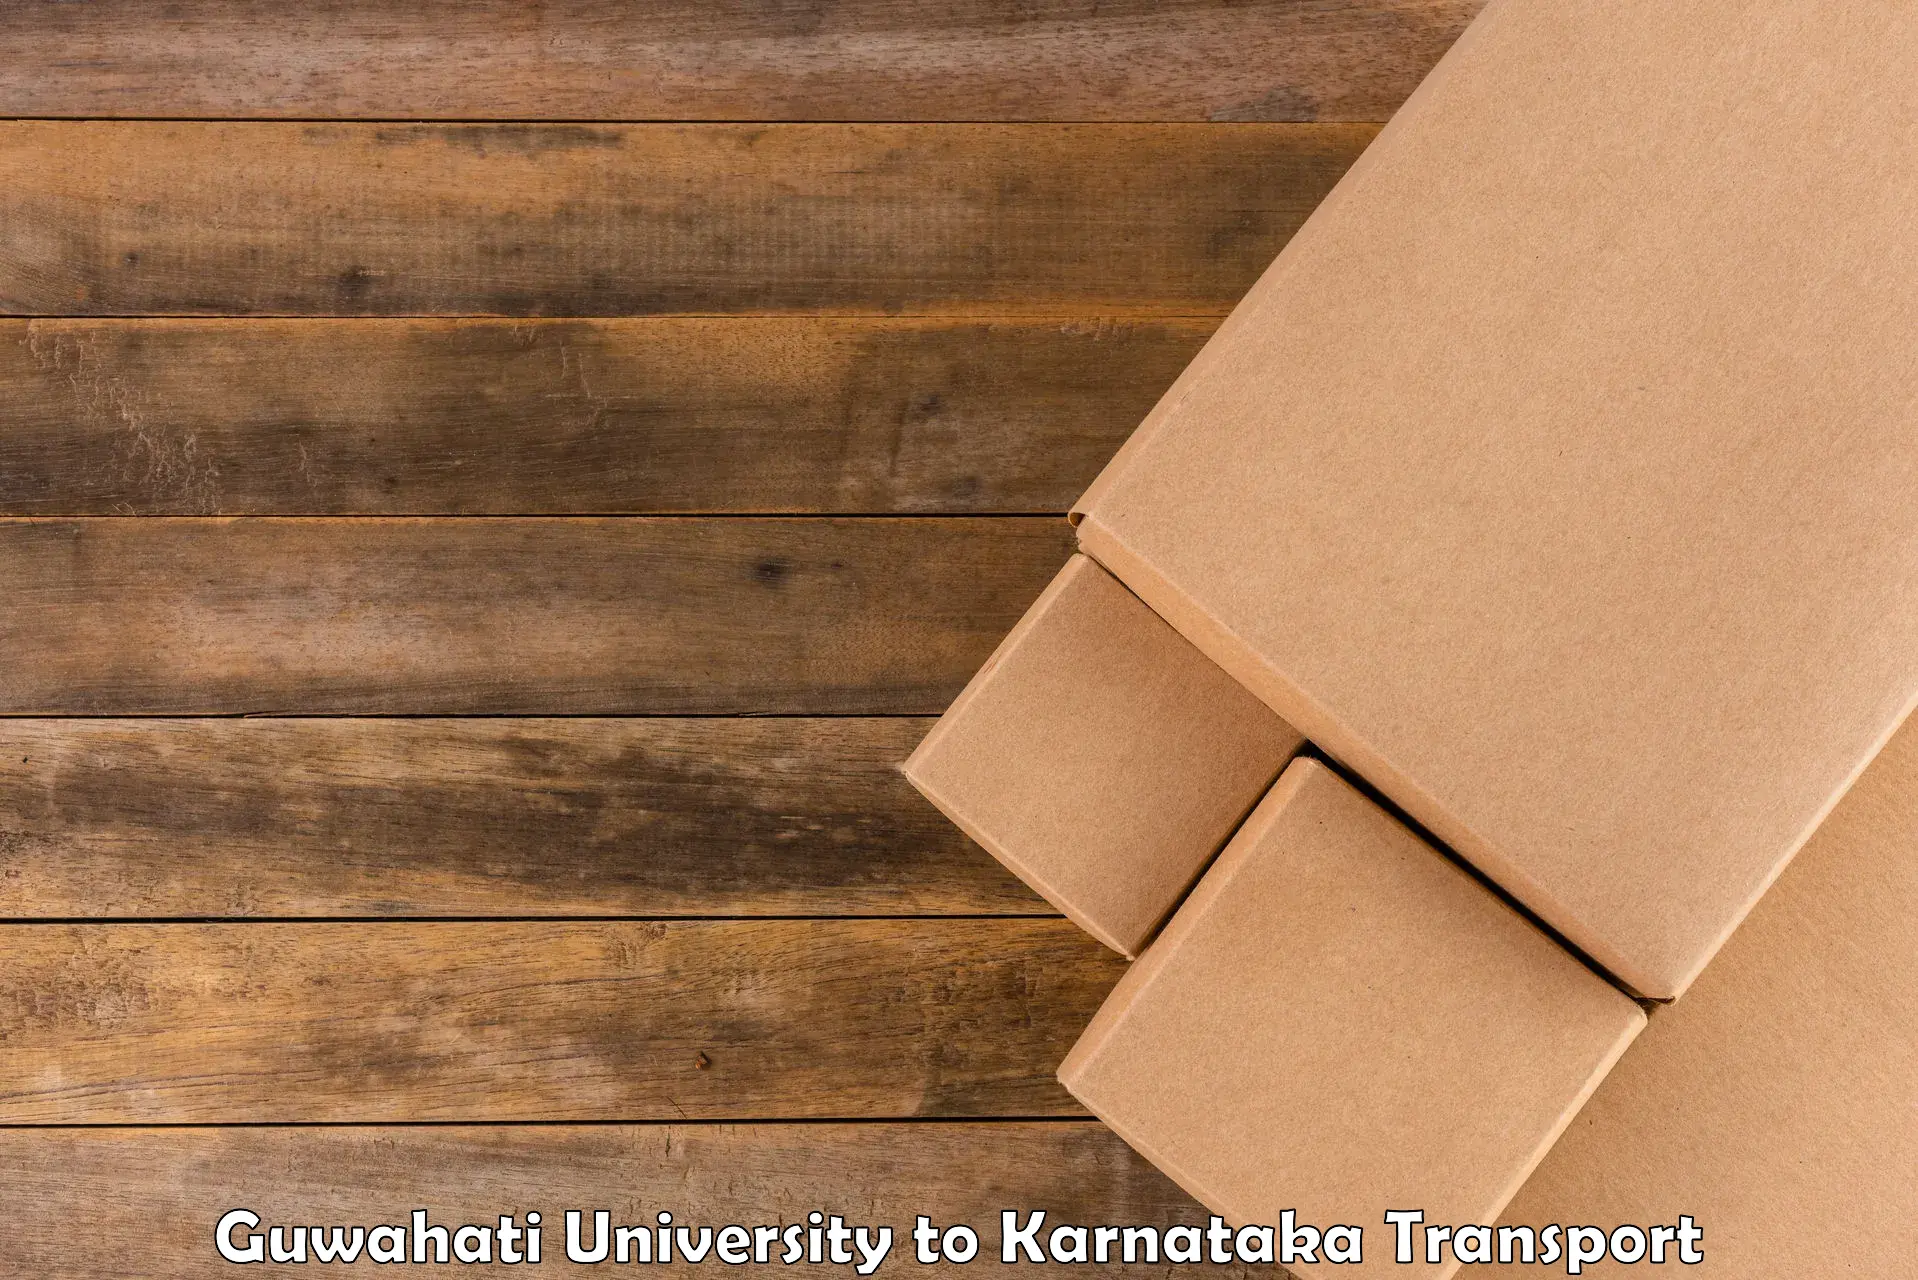 Container transportation services Guwahati University to Siruguppa